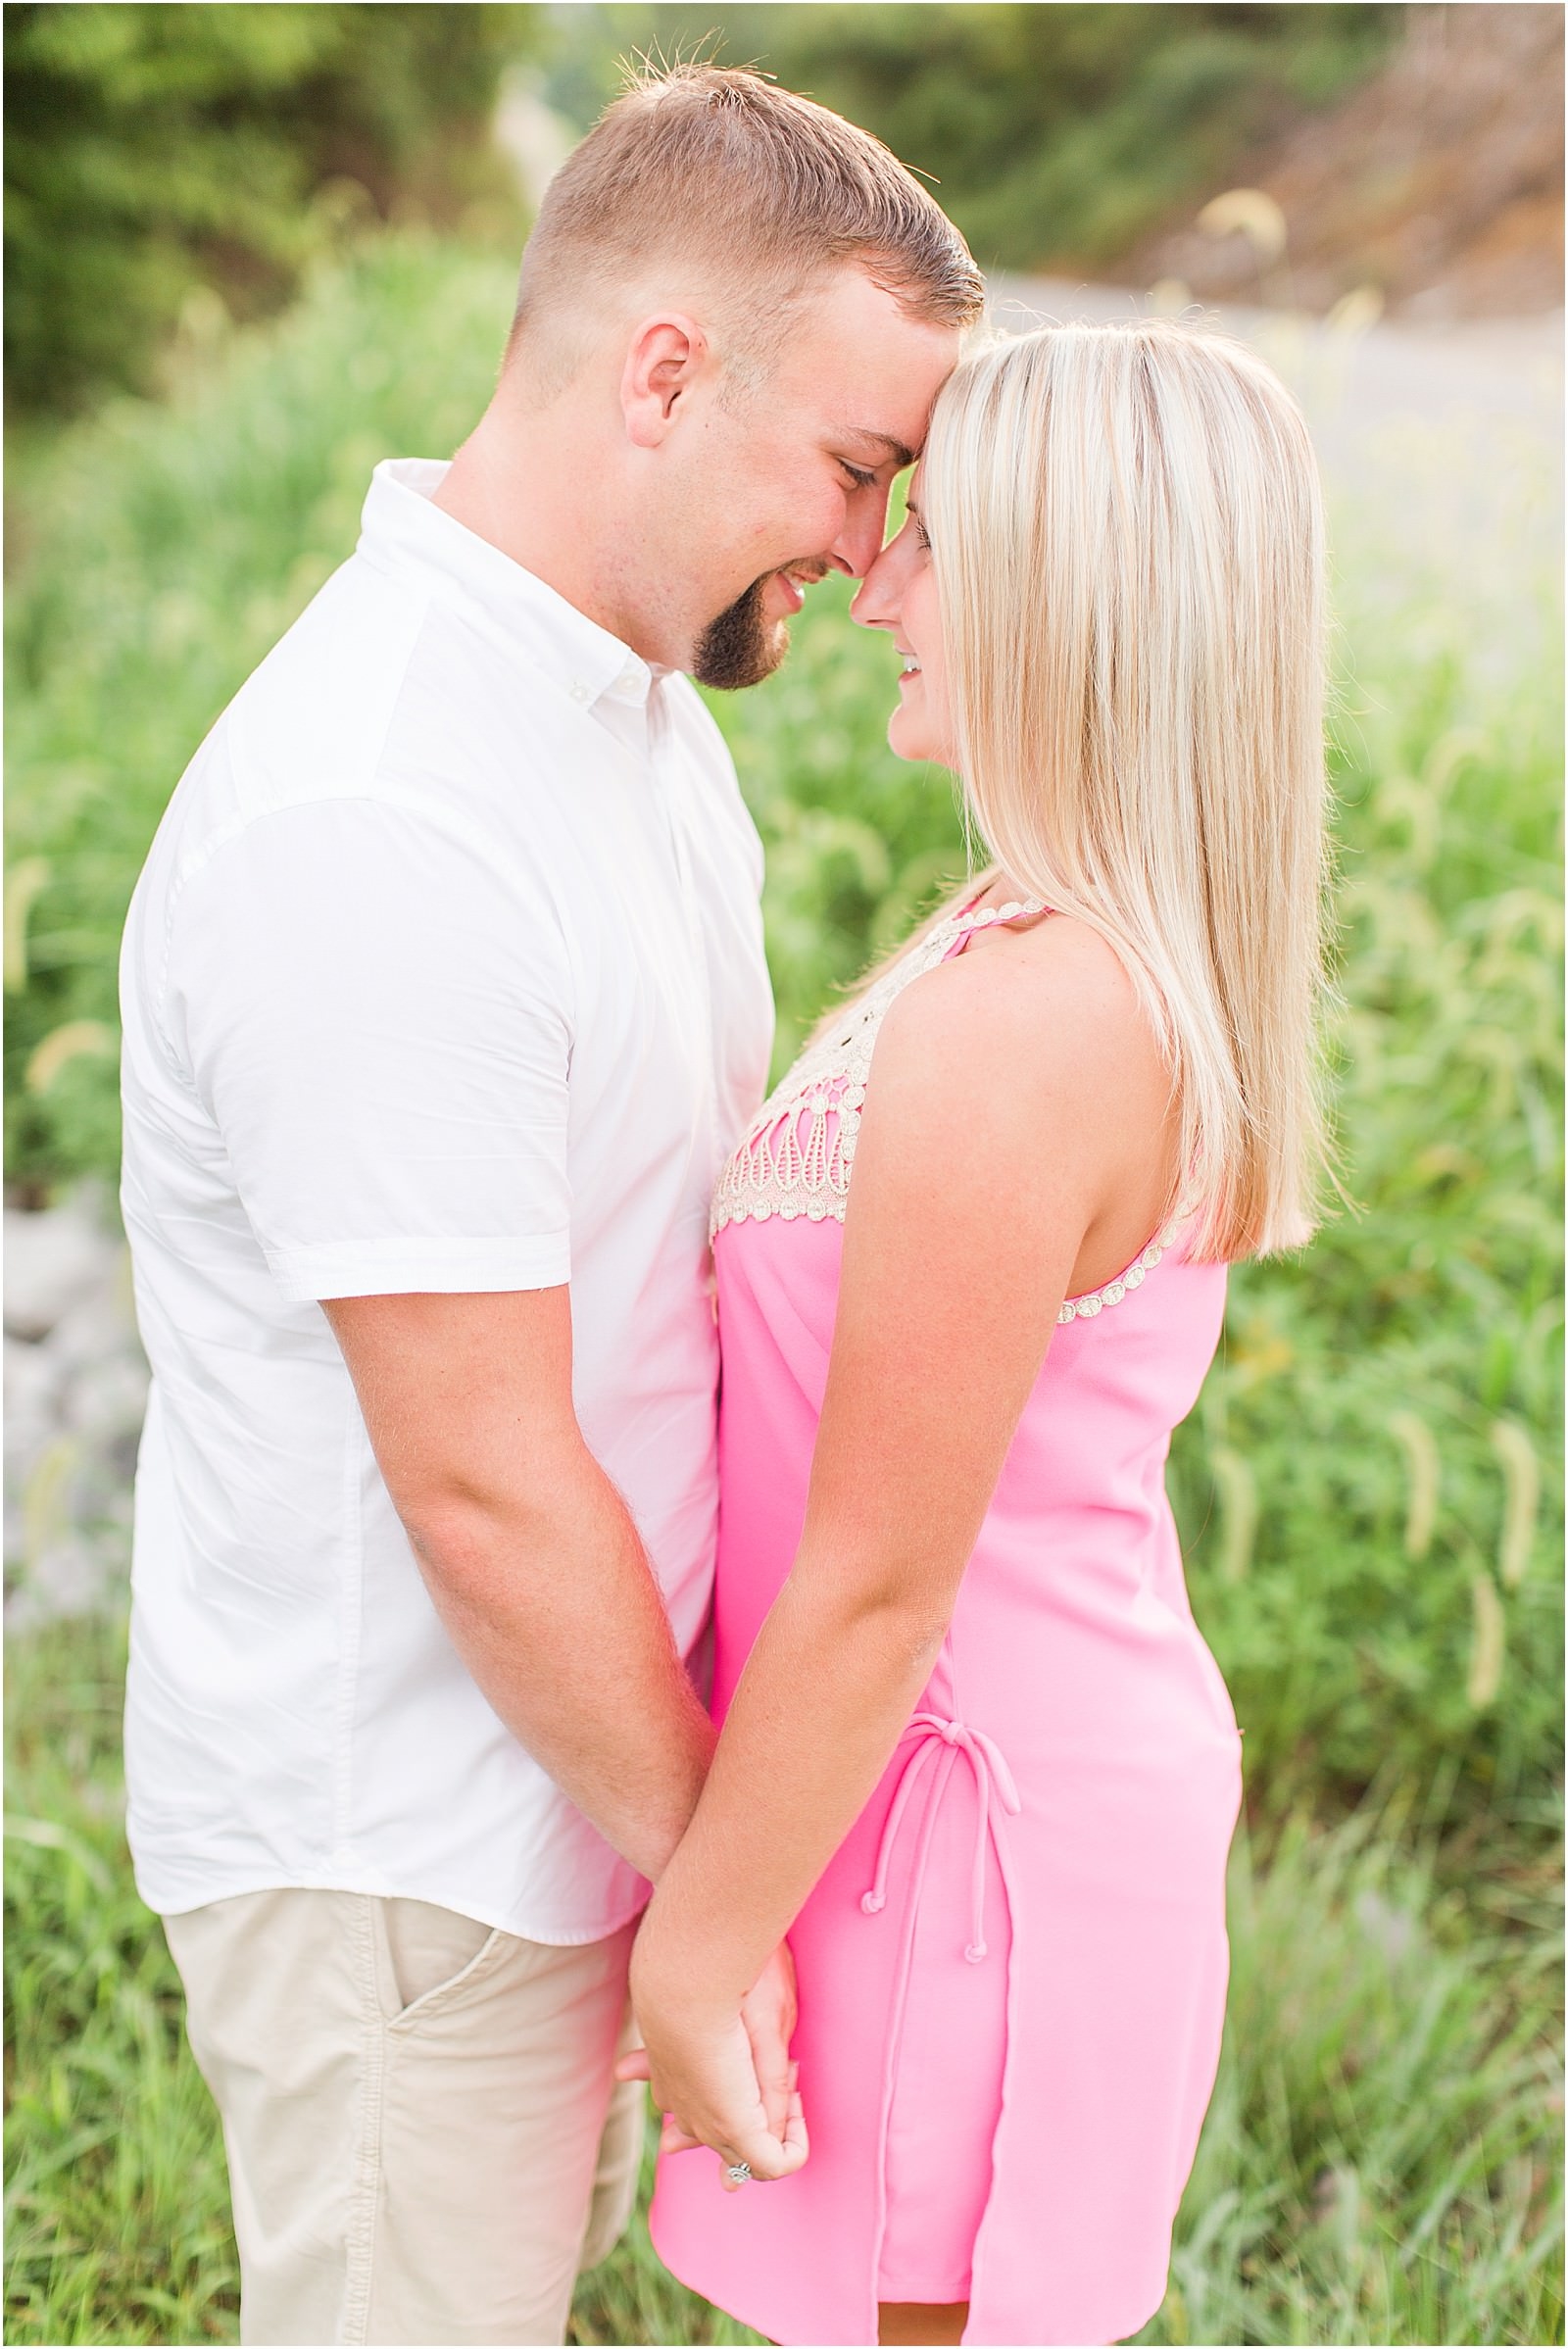 Lauren and Bryce | The Corner House B&ed and Breakfast Engagement Session | Bret and Brandie Photography 010.jpg